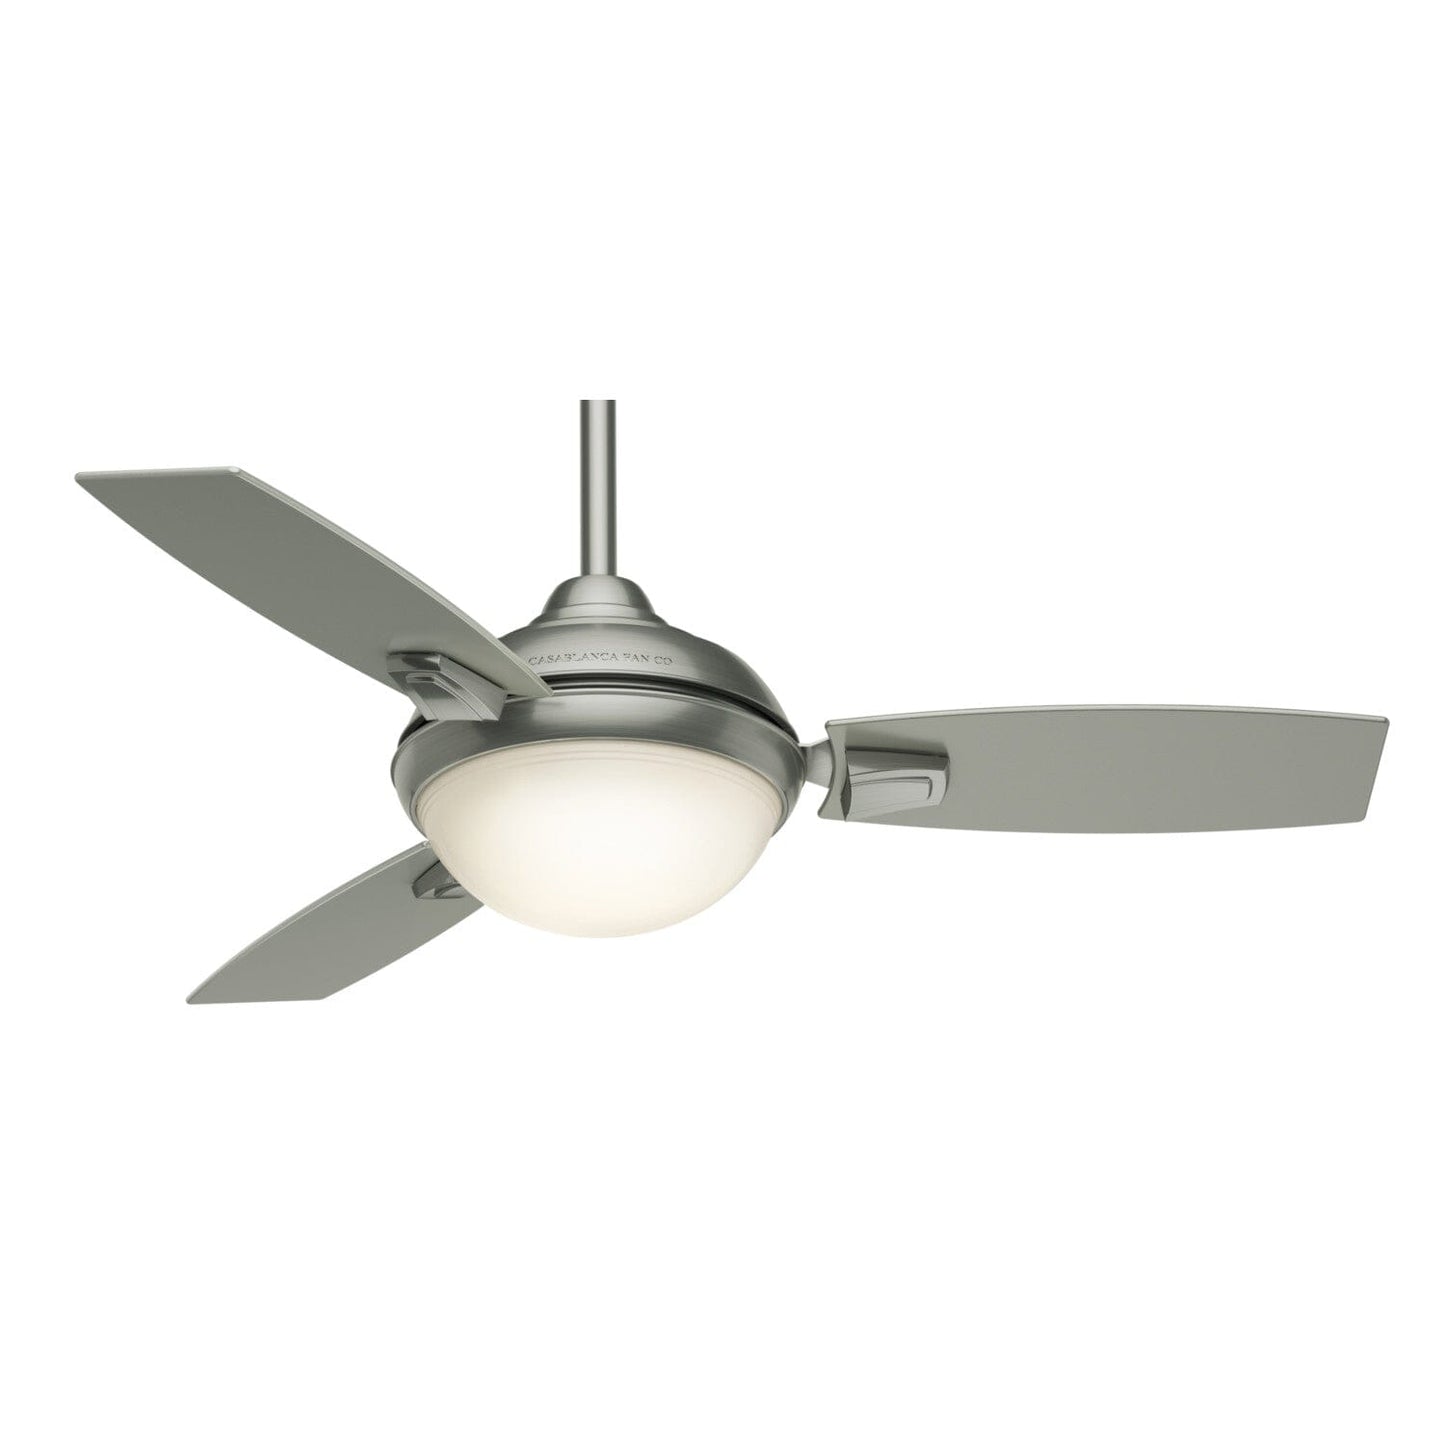 Verse Outdoor with LED Light 44 inch Ceiling Fans Casablanca Brushed Nickel - Casa Platinum 